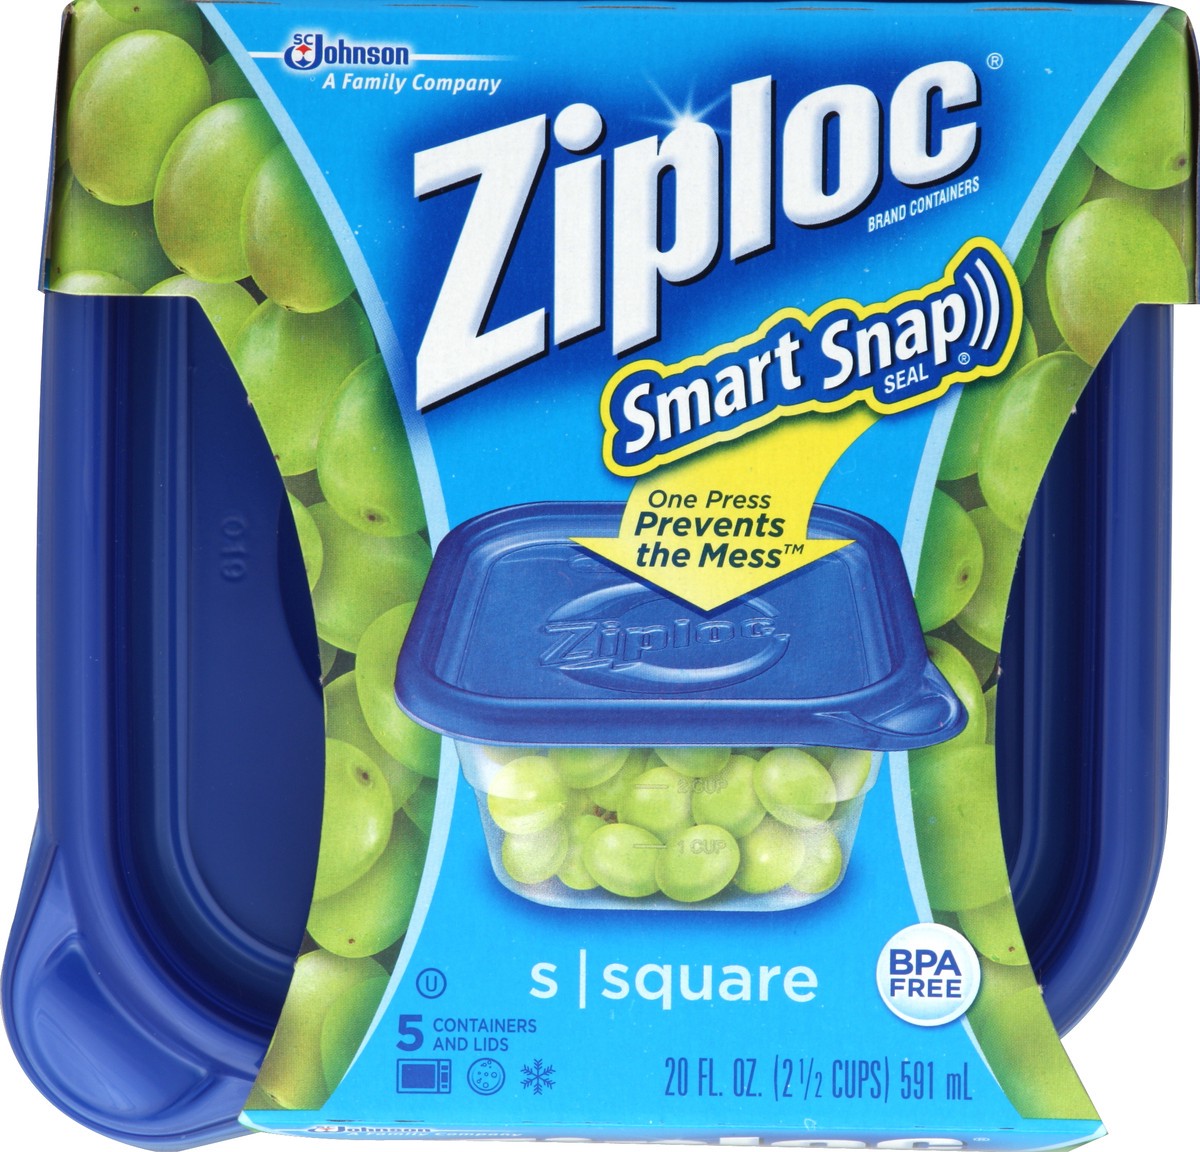 slide 2 of 5, Ziploc Smart Snap Small Square Containers And Lids, 5 ct